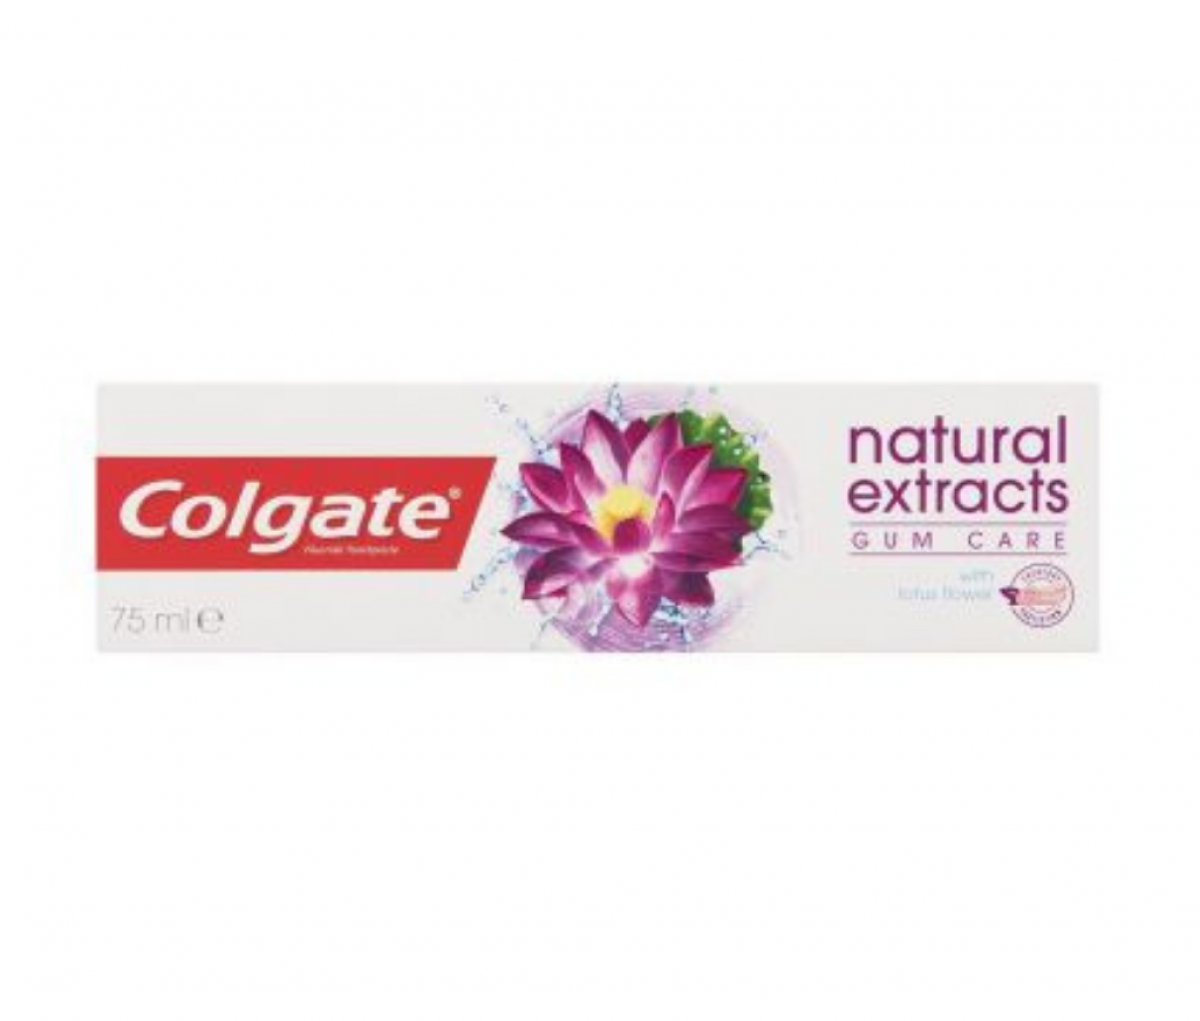 Colgate 75ml Natural Extracts Gum Care